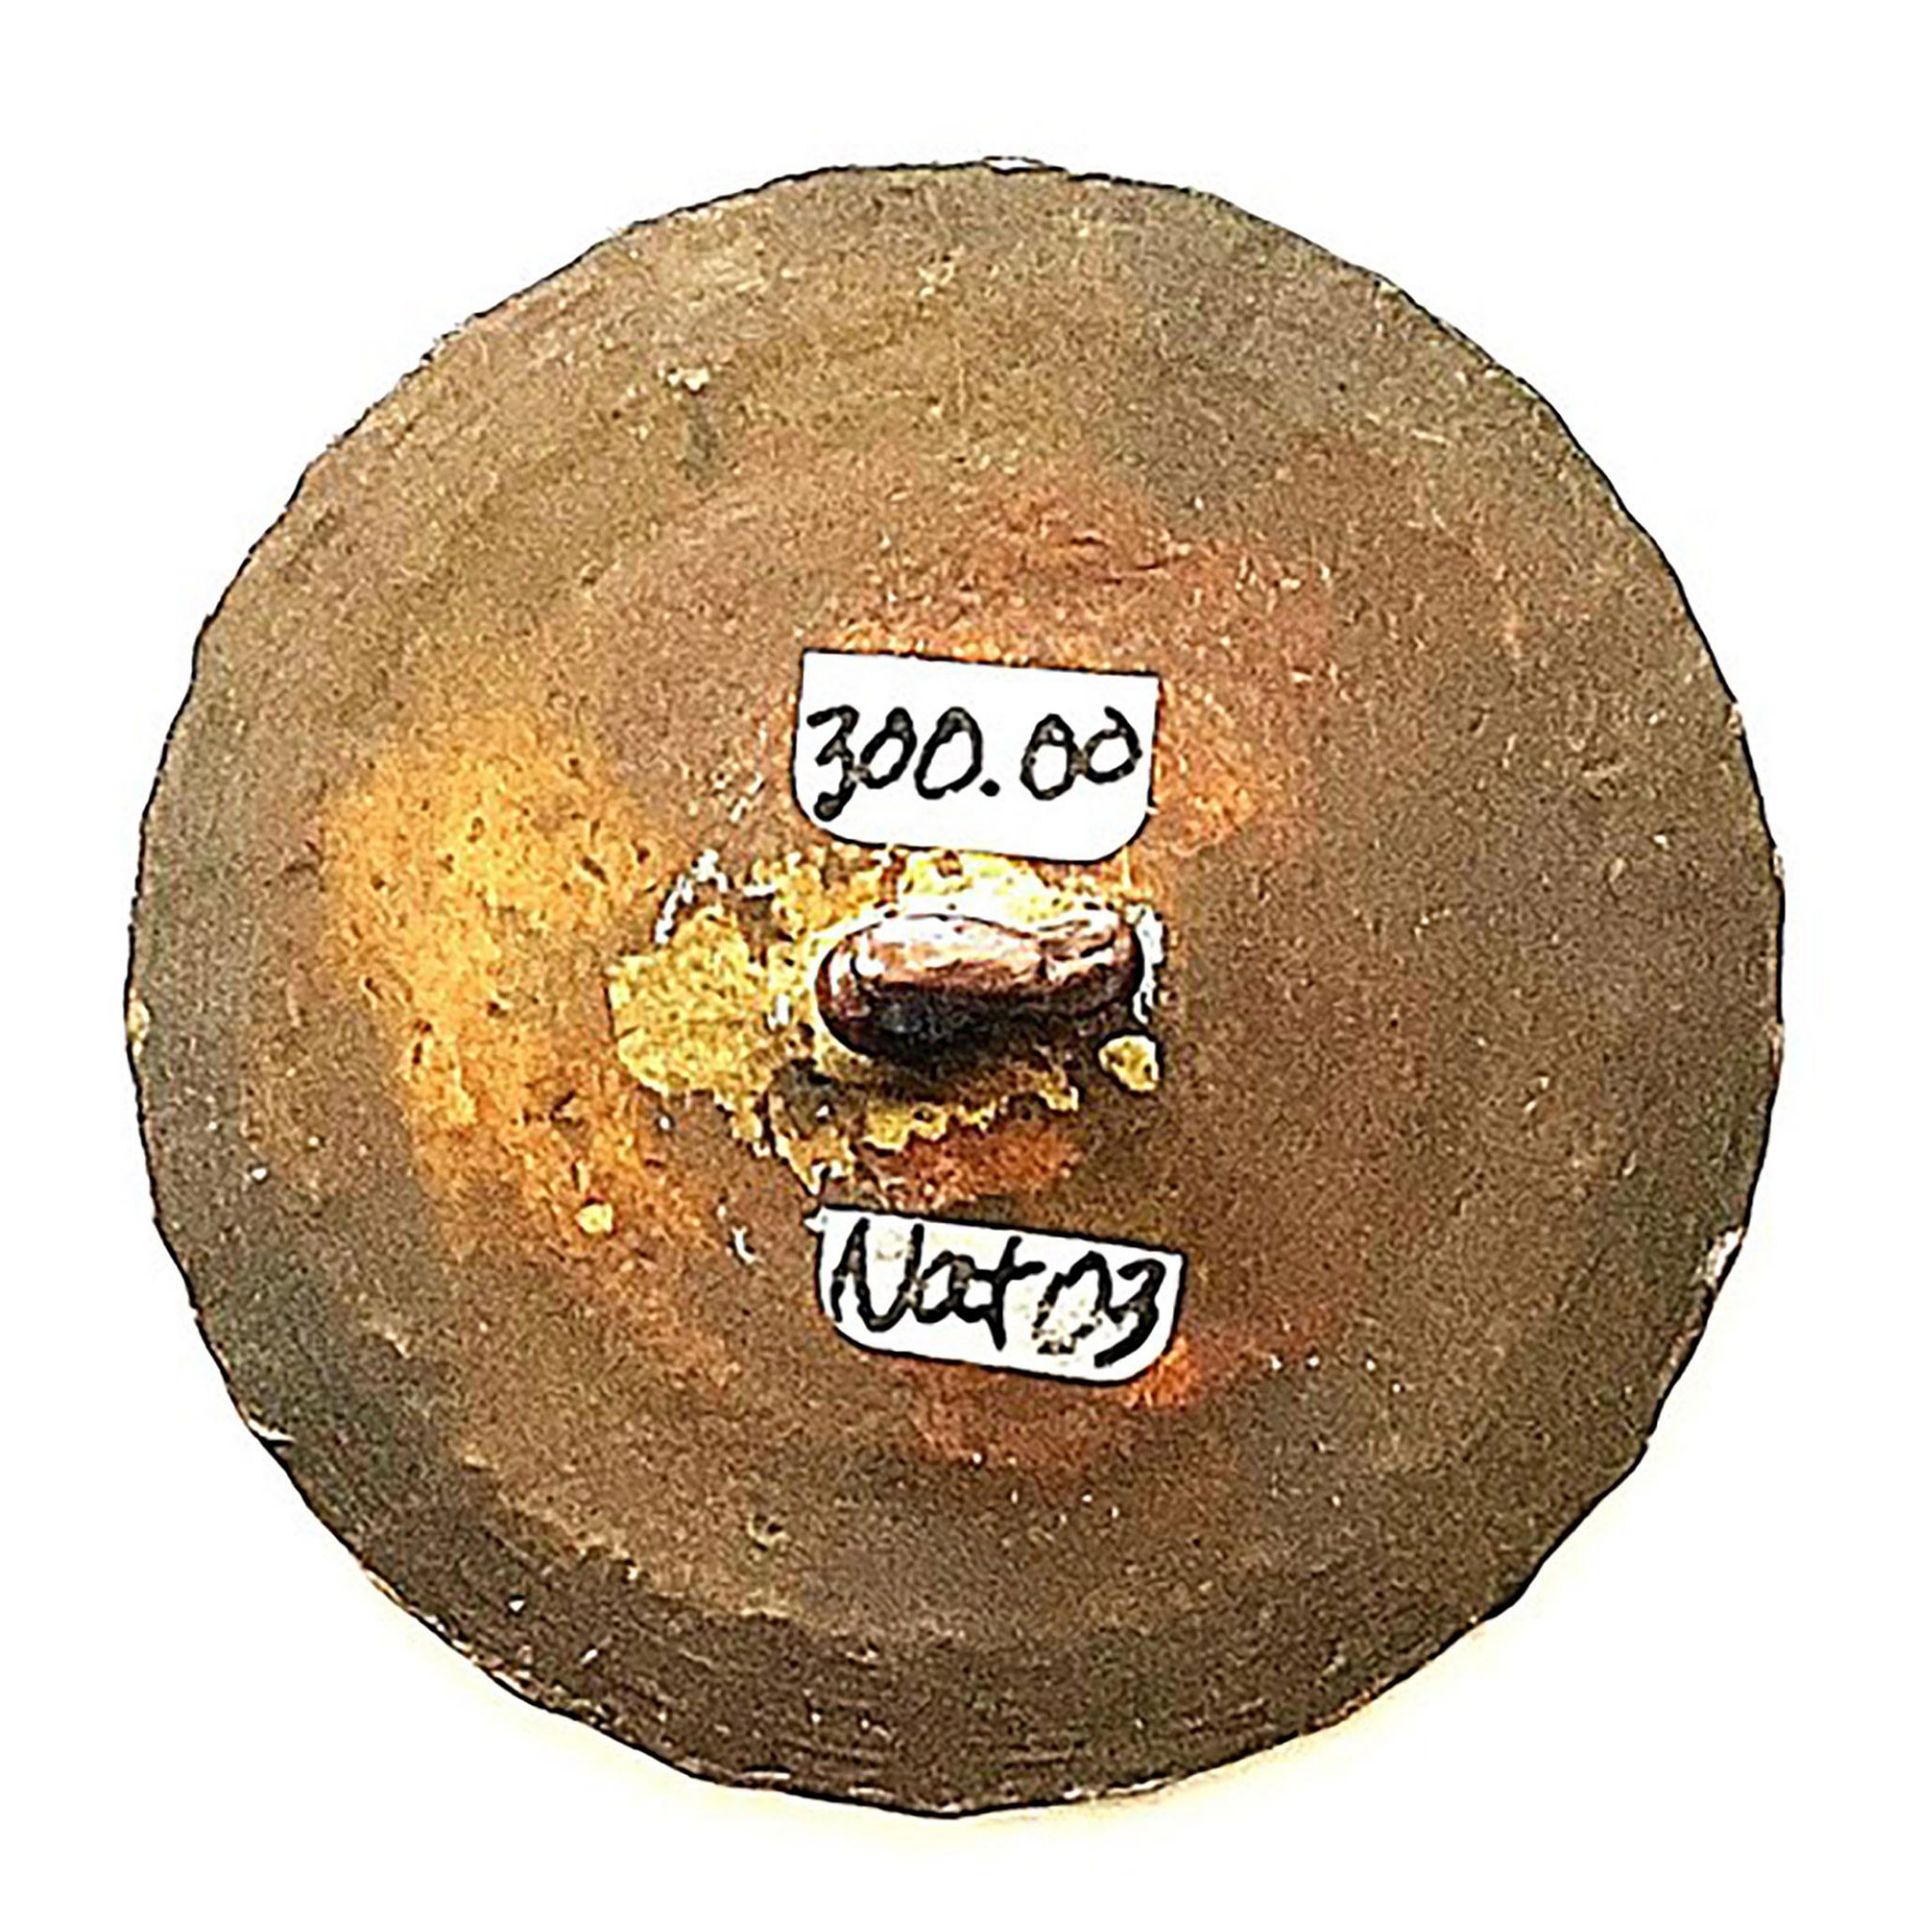 A division one copper pictorial button - Image 2 of 2